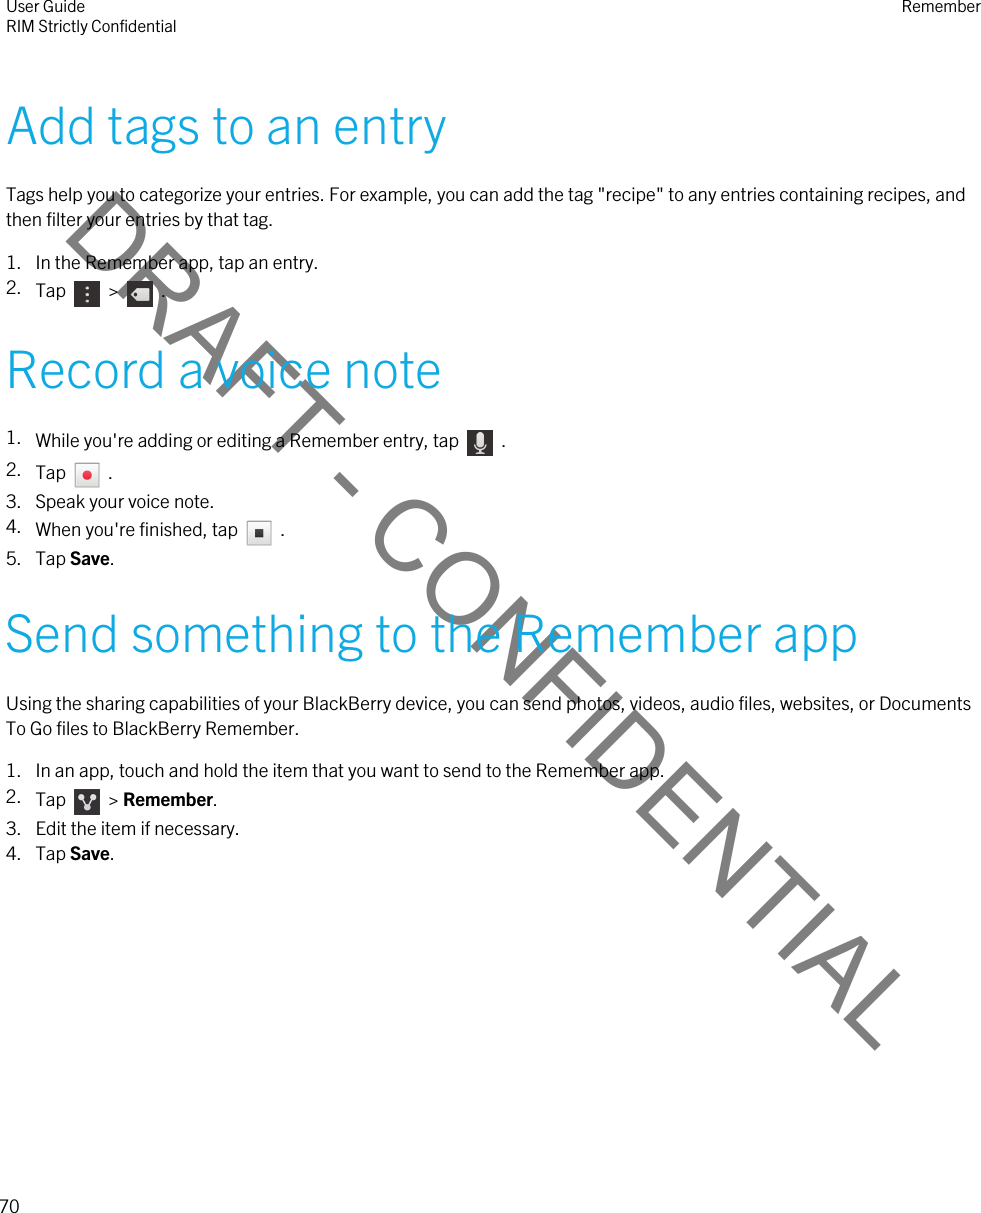 DRAFT - CONFIDENTIALAdd tags to an entryTags help you to categorize your entries. For example, you can add the tag &quot;recipe&quot; to any entries containing recipes, and then filter your entries by that tag.1. In the Remember app, tap an entry.2. Tap    &gt;    .Record a voice note1. While you&apos;re adding or editing a Remember entry, tap    .2. Tap    .3. Speak your voice note.4. When you&apos;re finished, tap    .5. Tap Save.Send something to the Remember appUsing the sharing capabilities of your BlackBerry device, you can send photos, videos, audio files, websites, or Documents To Go files to BlackBerry Remember.1. In an app, touch and hold the item that you want to send to the Remember app.2. Tap    &gt; Remember.3. Edit the item if necessary.4. Tap Save.User GuideRIM Strictly Confidential Remember70 